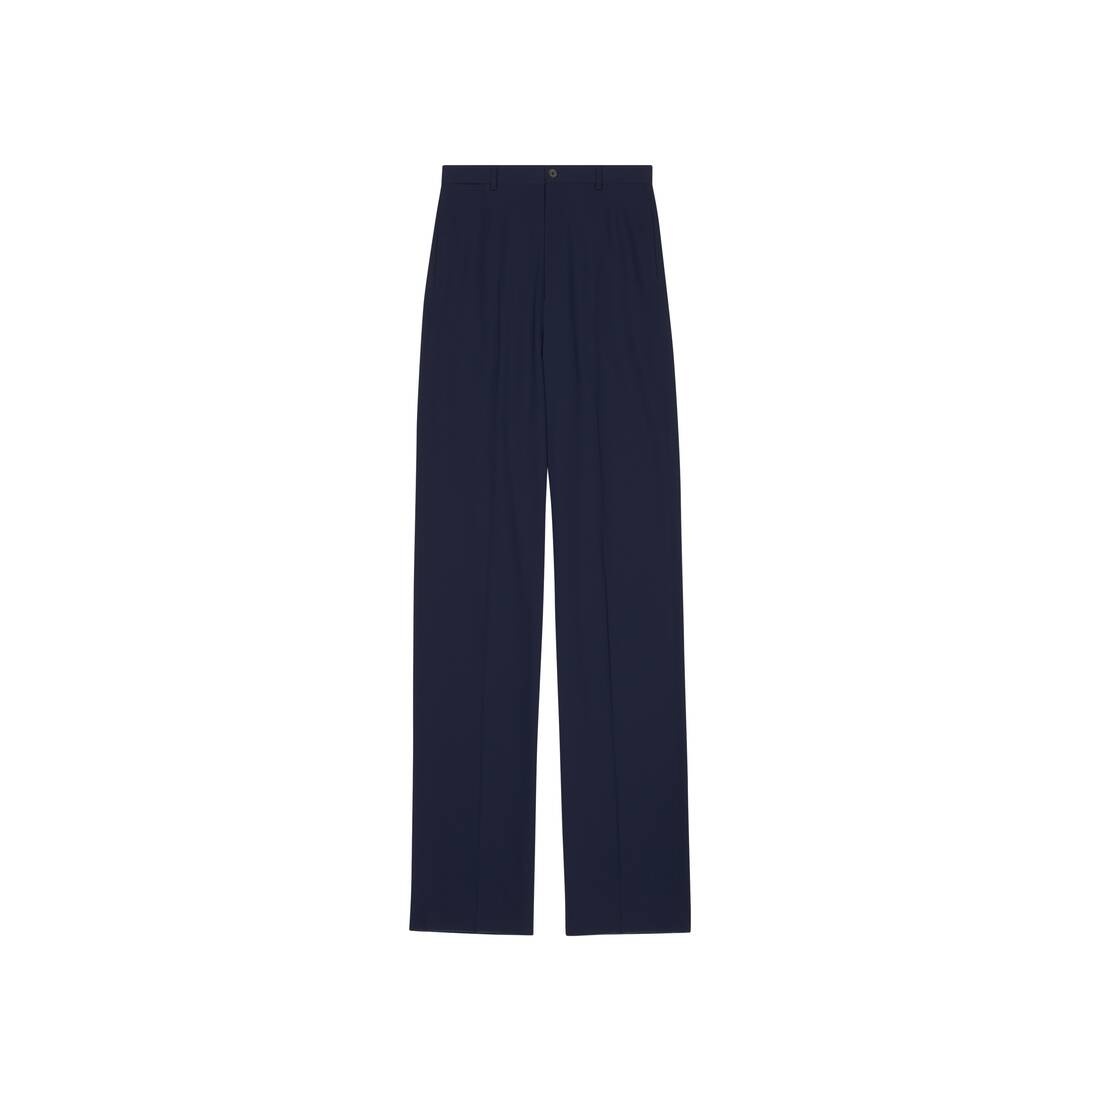 Men's Large Fit Tailored Pants in Navy Blue - 1